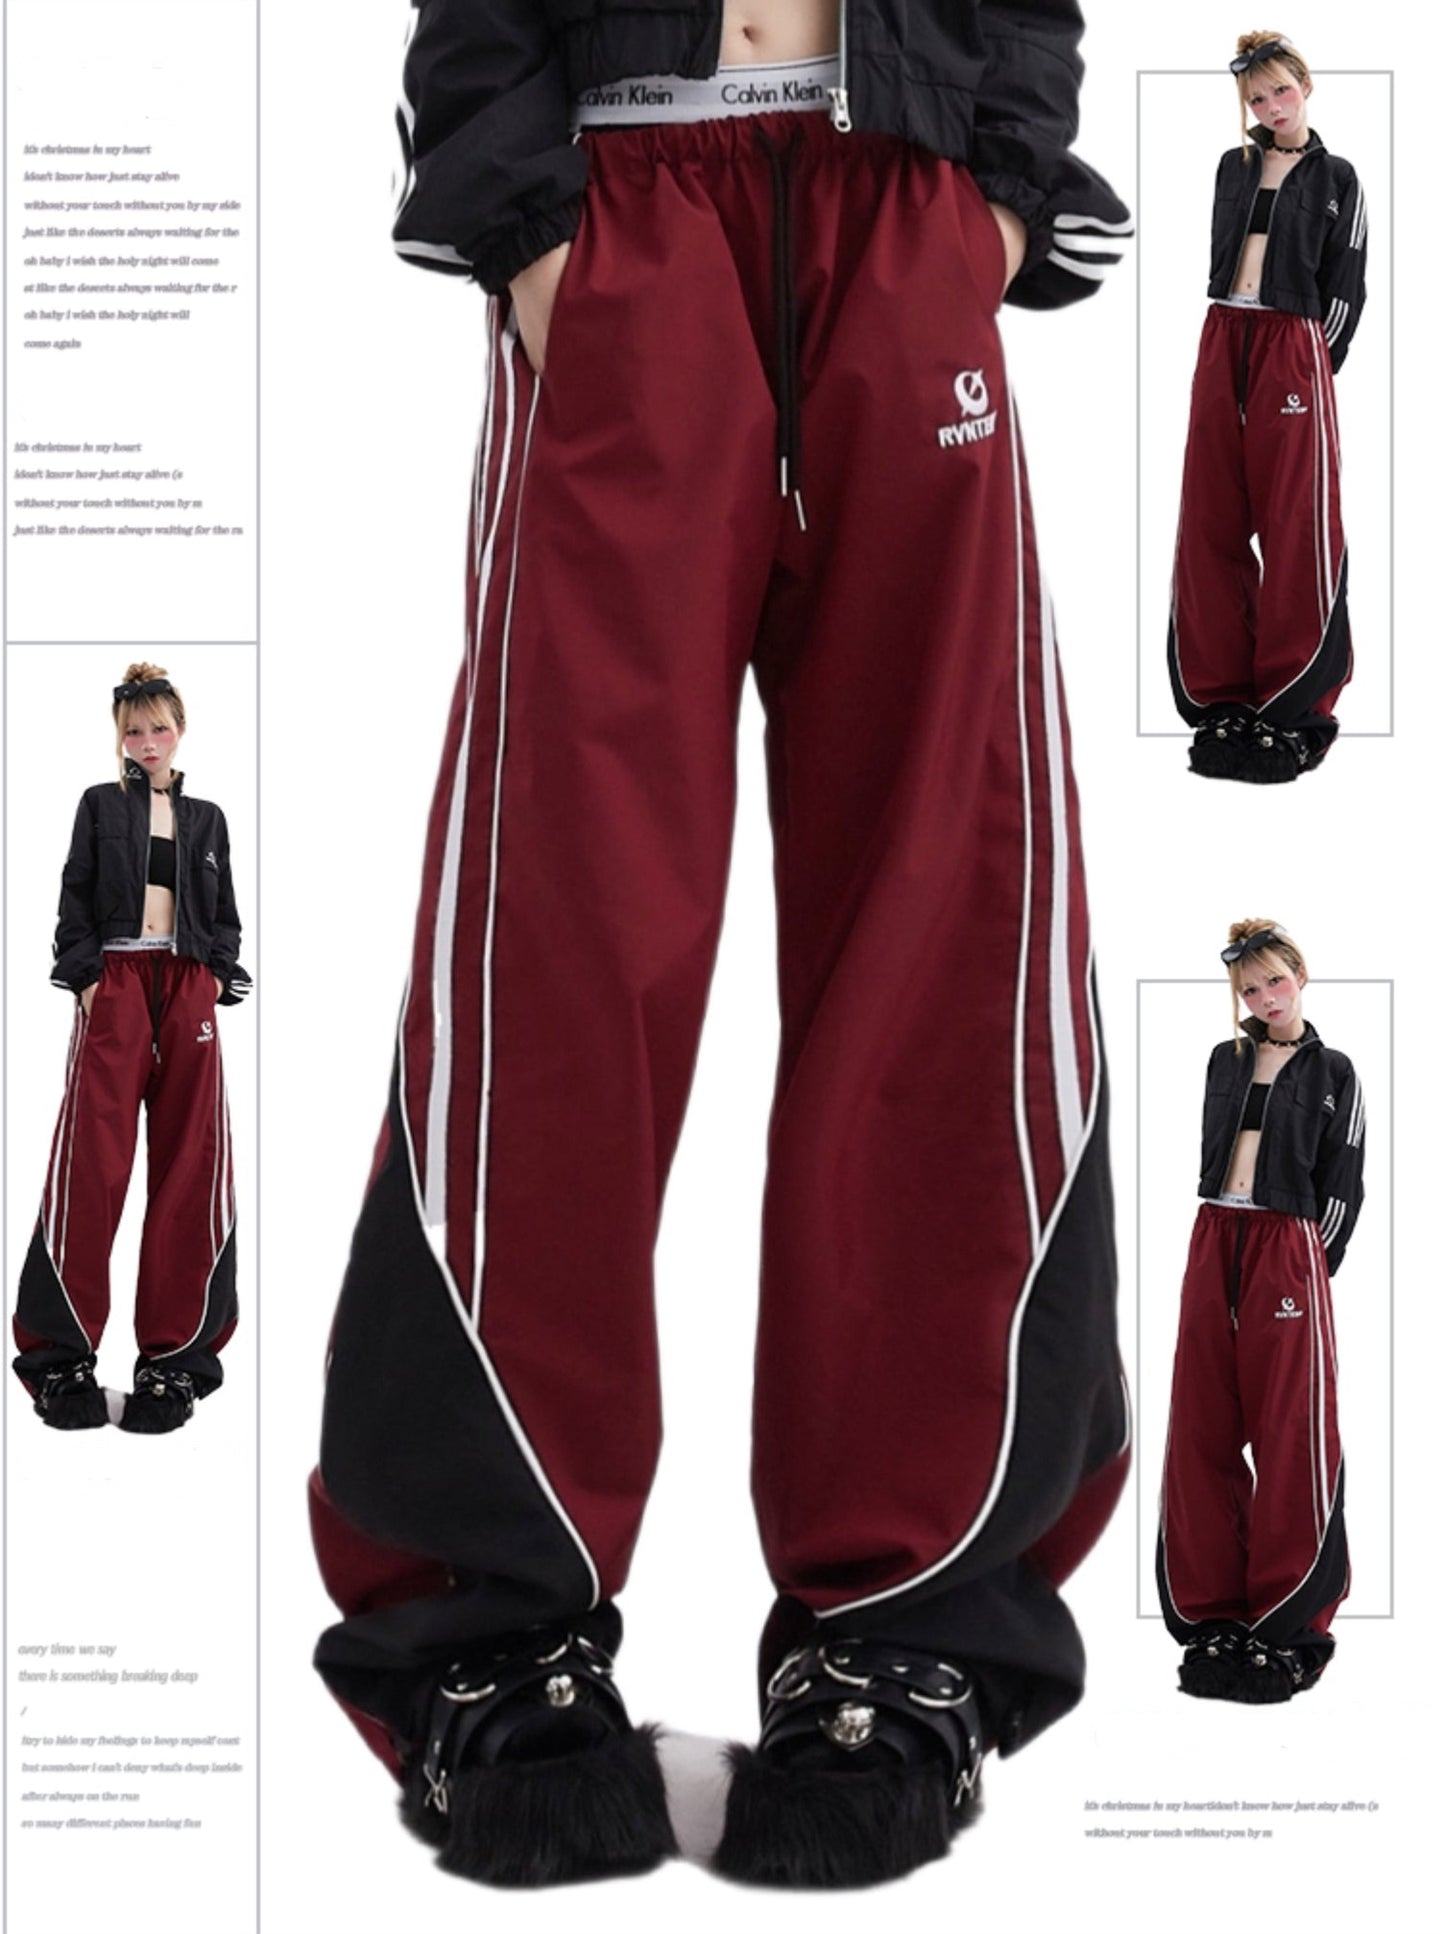 Straight sports pants with side stripe design